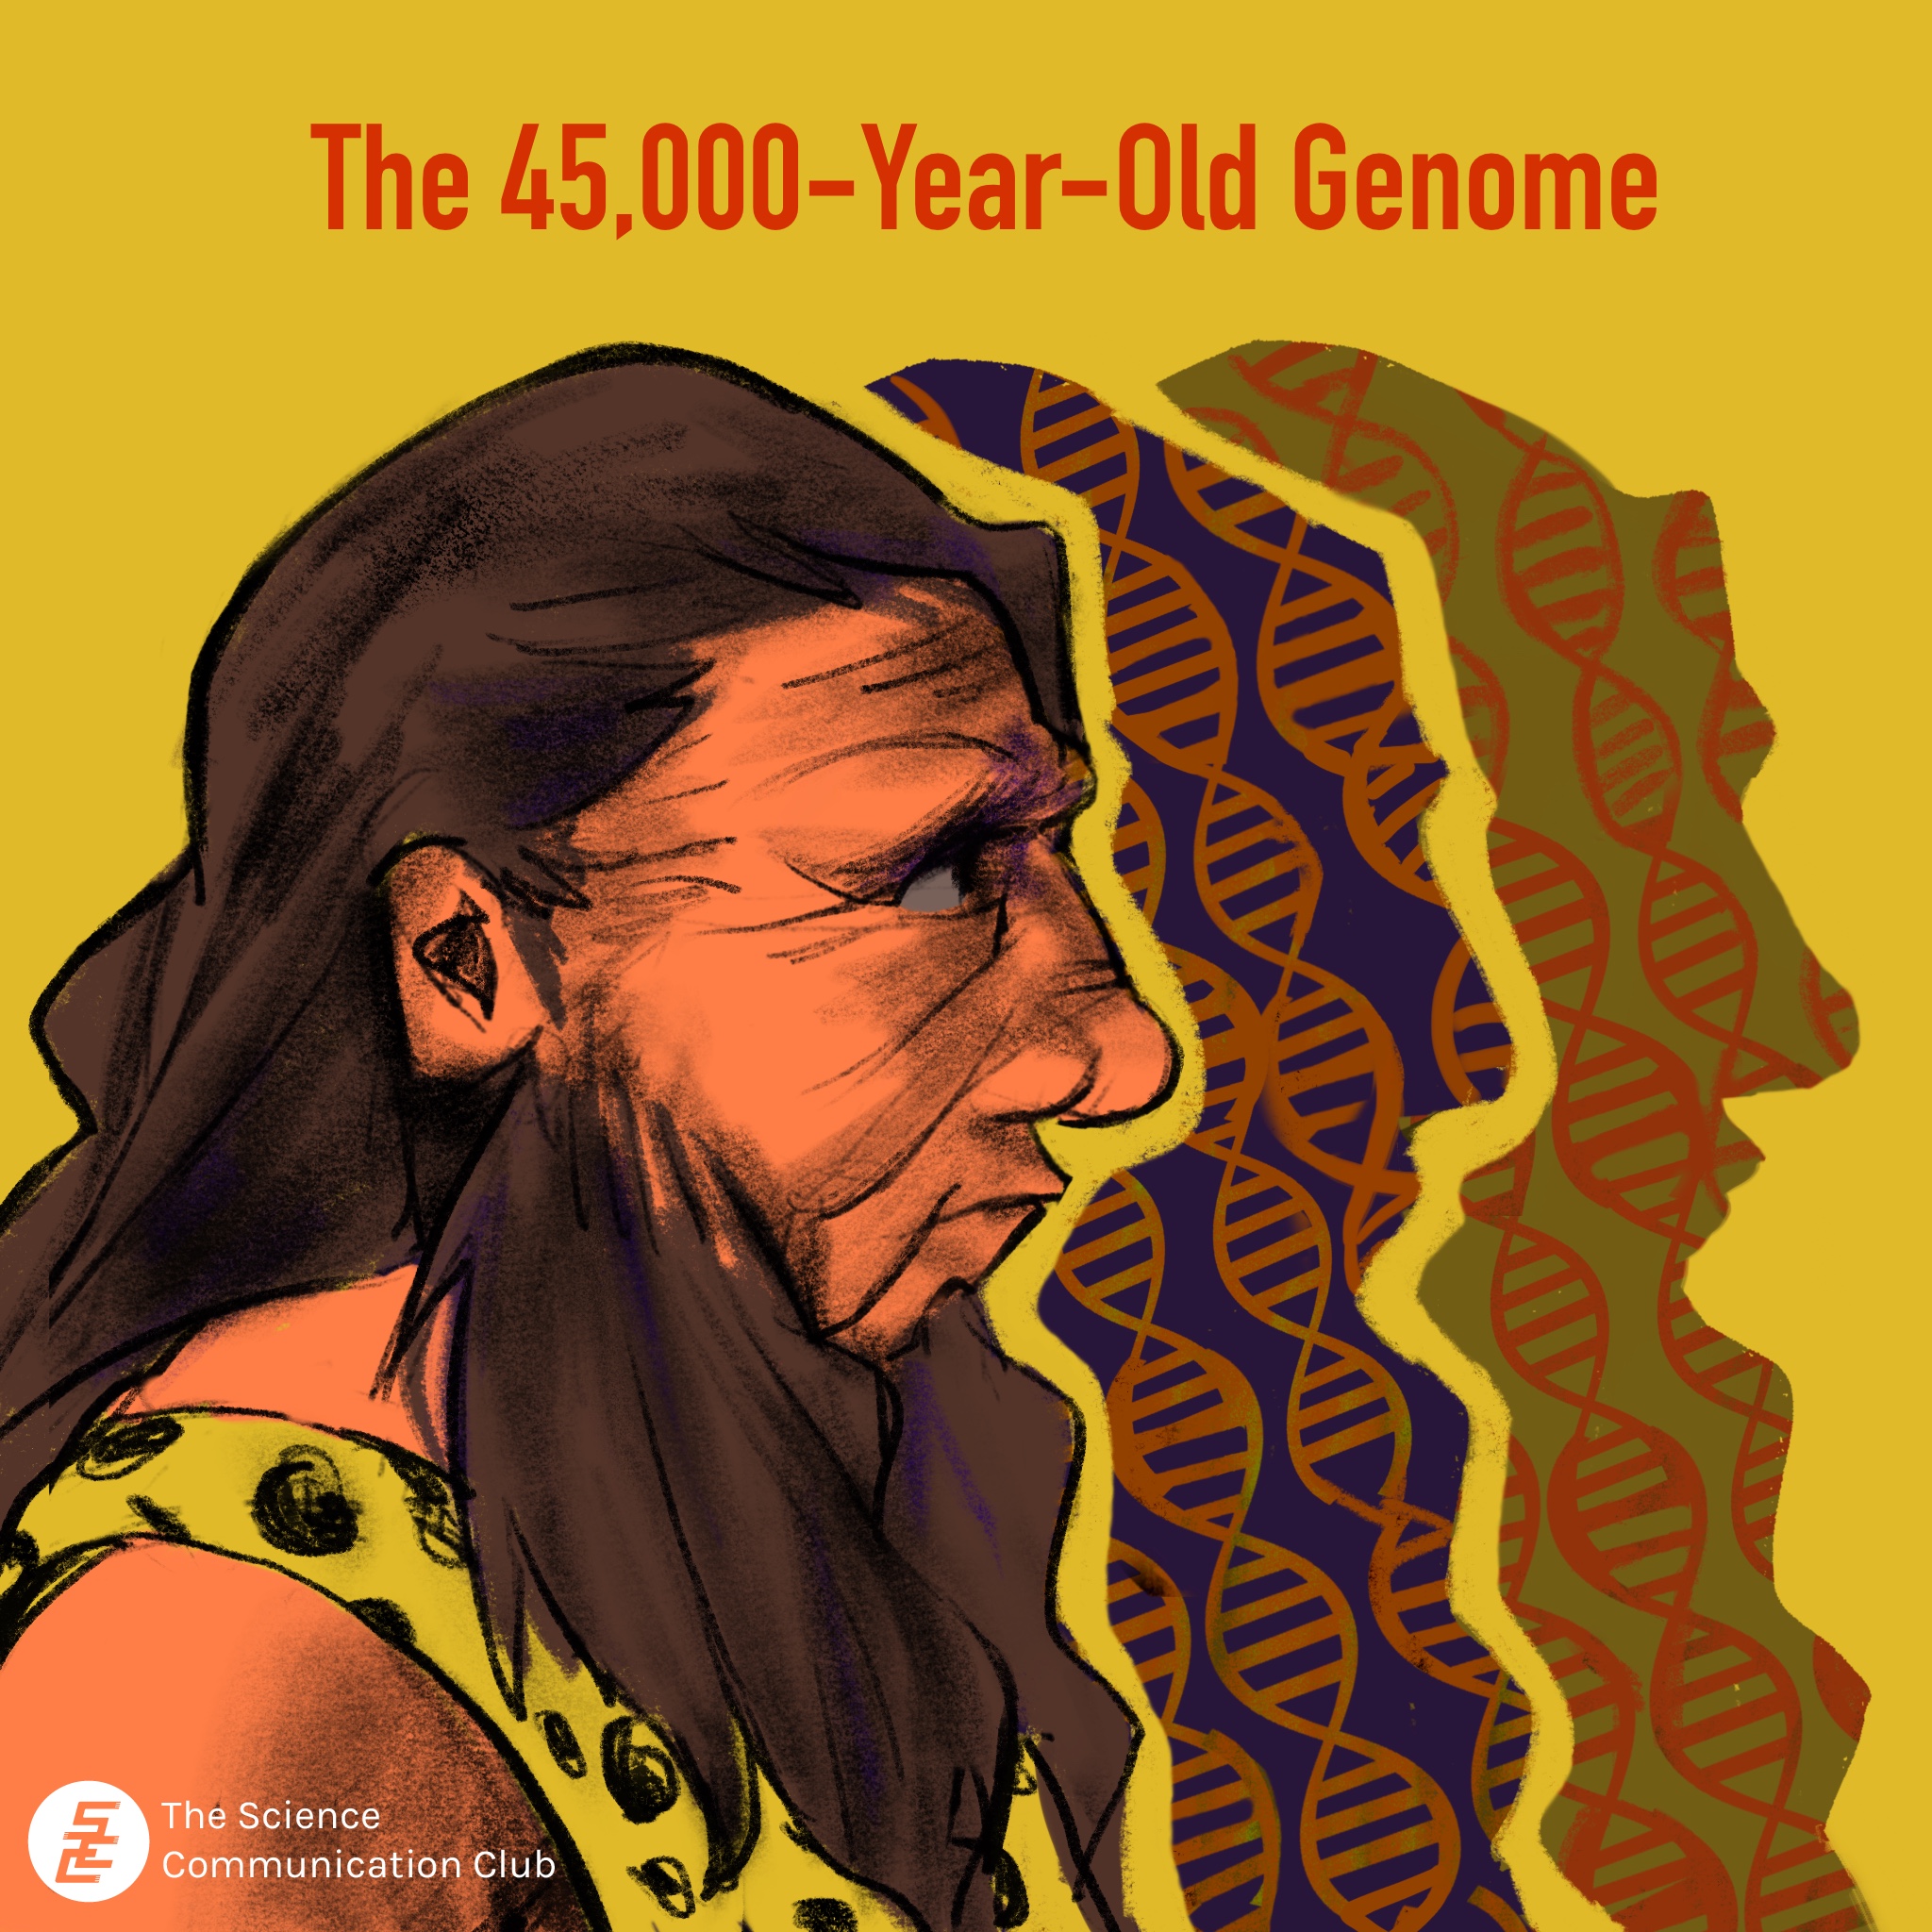 An illustrated profile view of a Neanderthal. Patterns of DNA fragments are shown on the casted shadow.